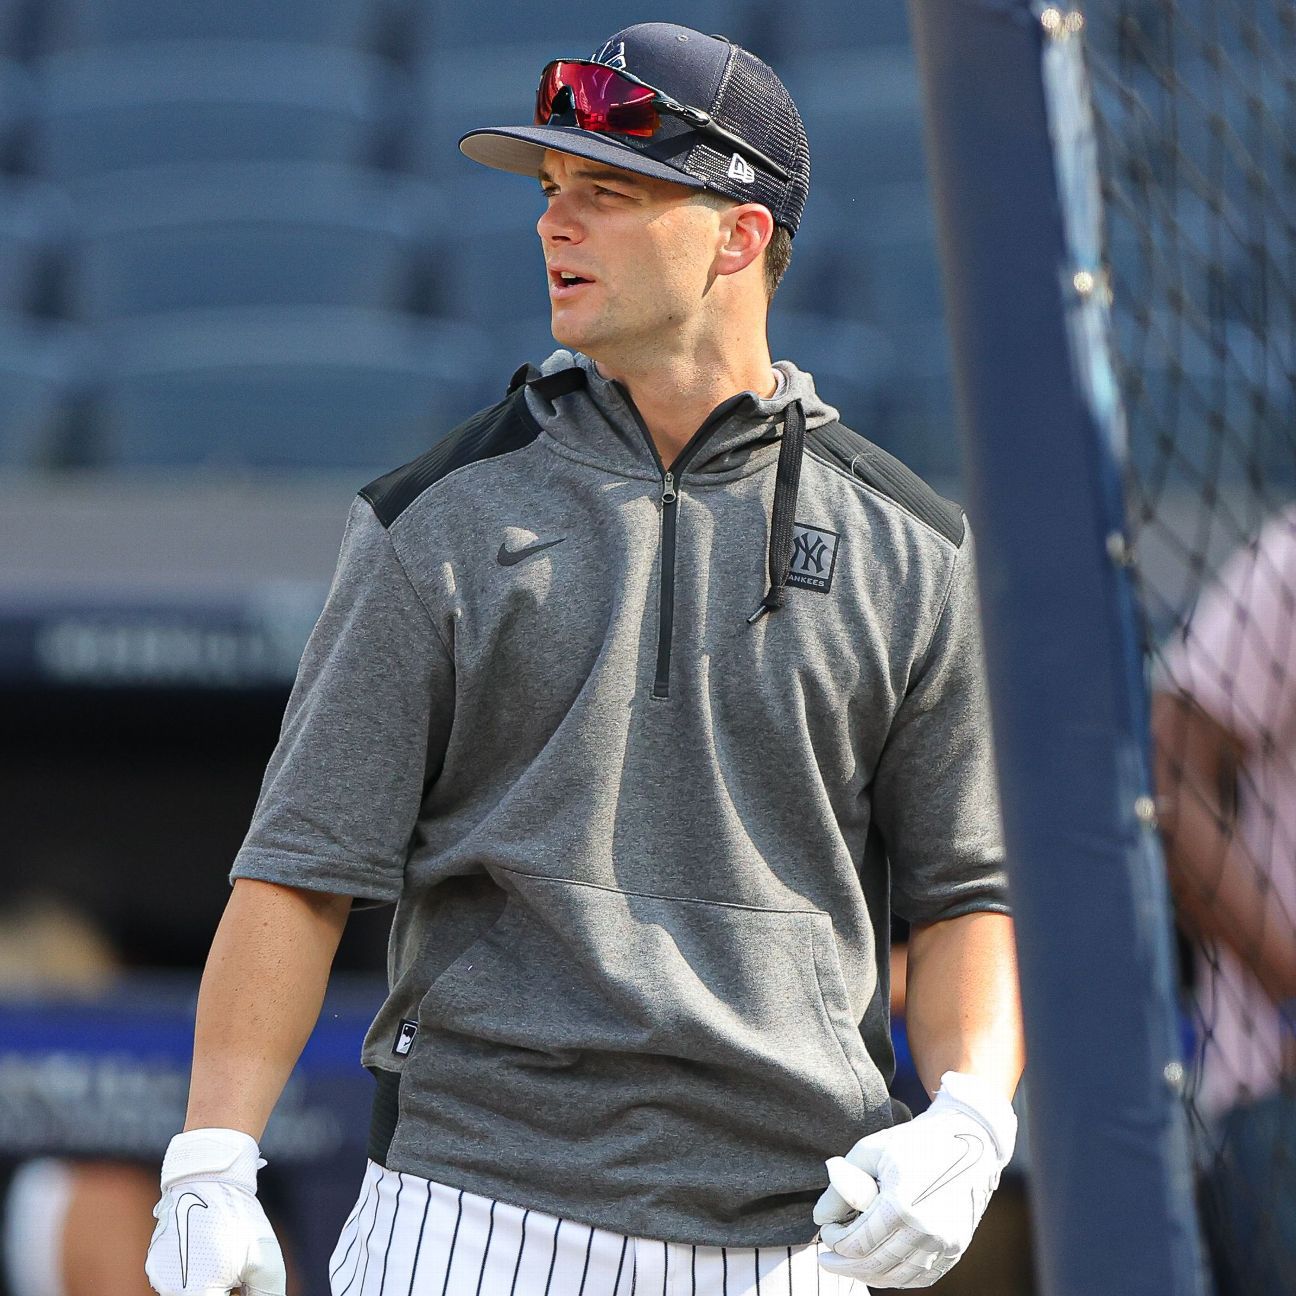 Andrew Benintendi joins New York Yankees, ready to compete for